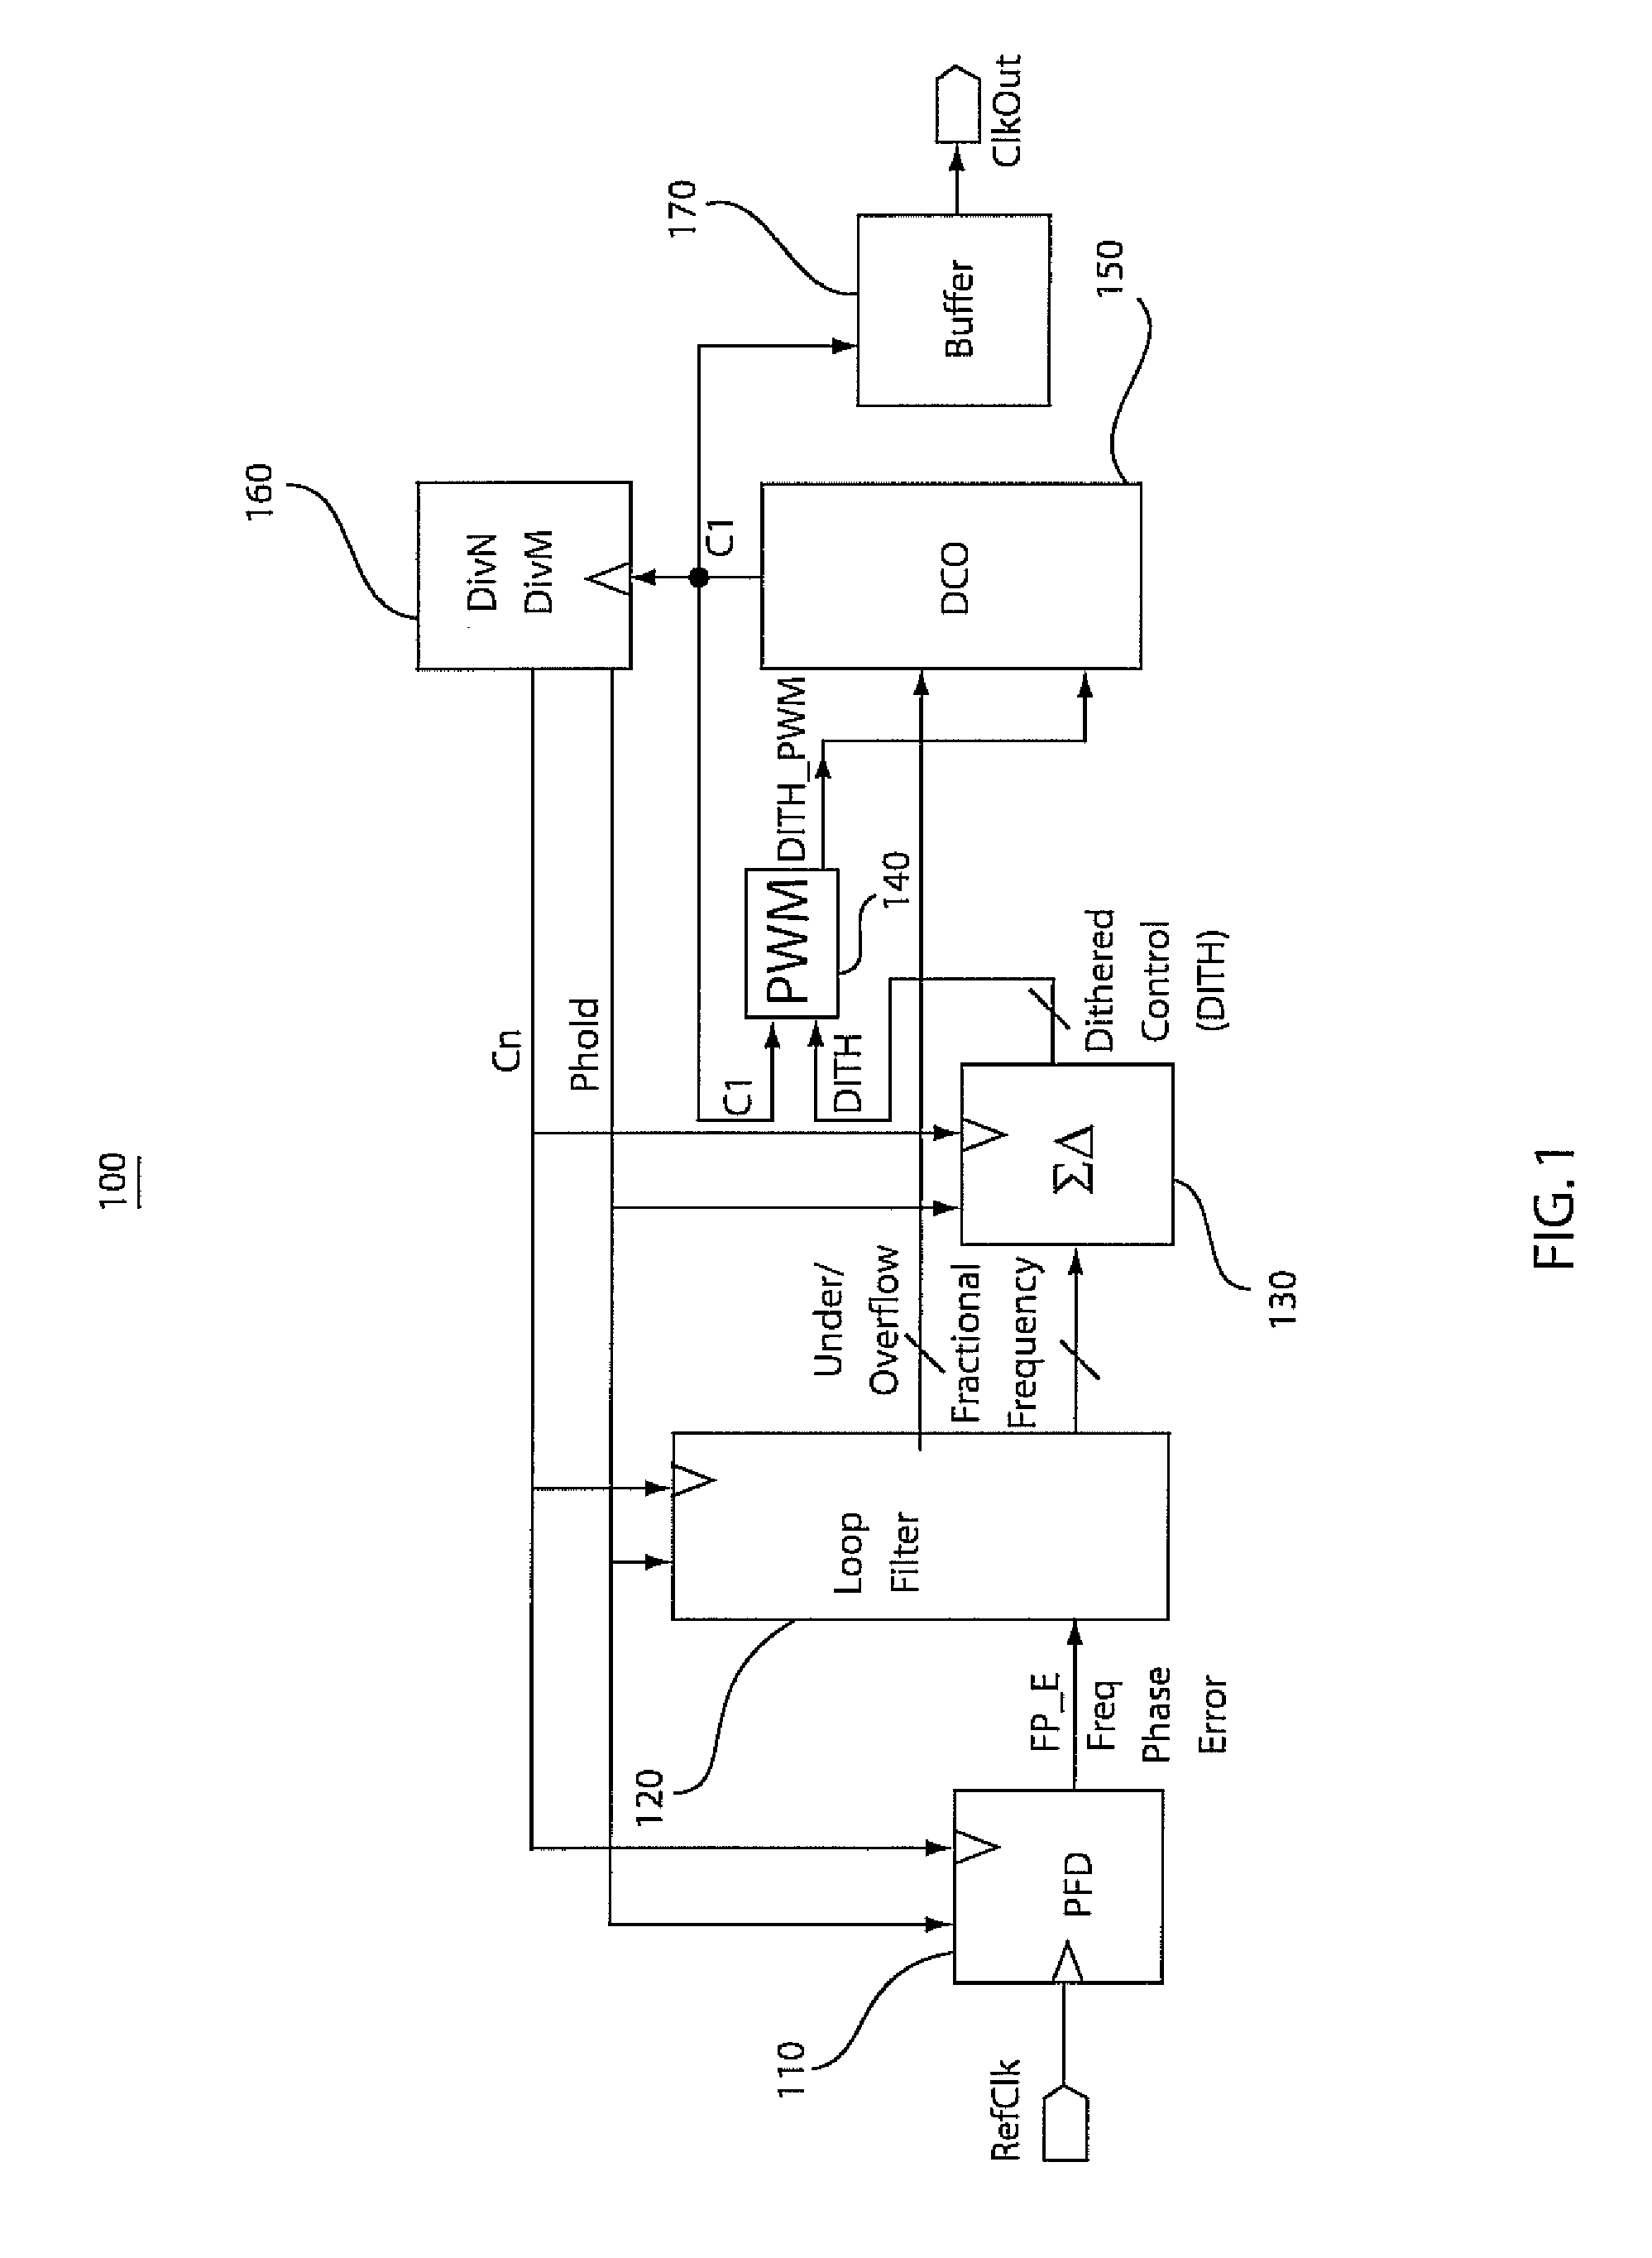 Phase-locked loop circuits and methods implementing pulsewidth modulation for fine tuning control of digitally controlled oscillators